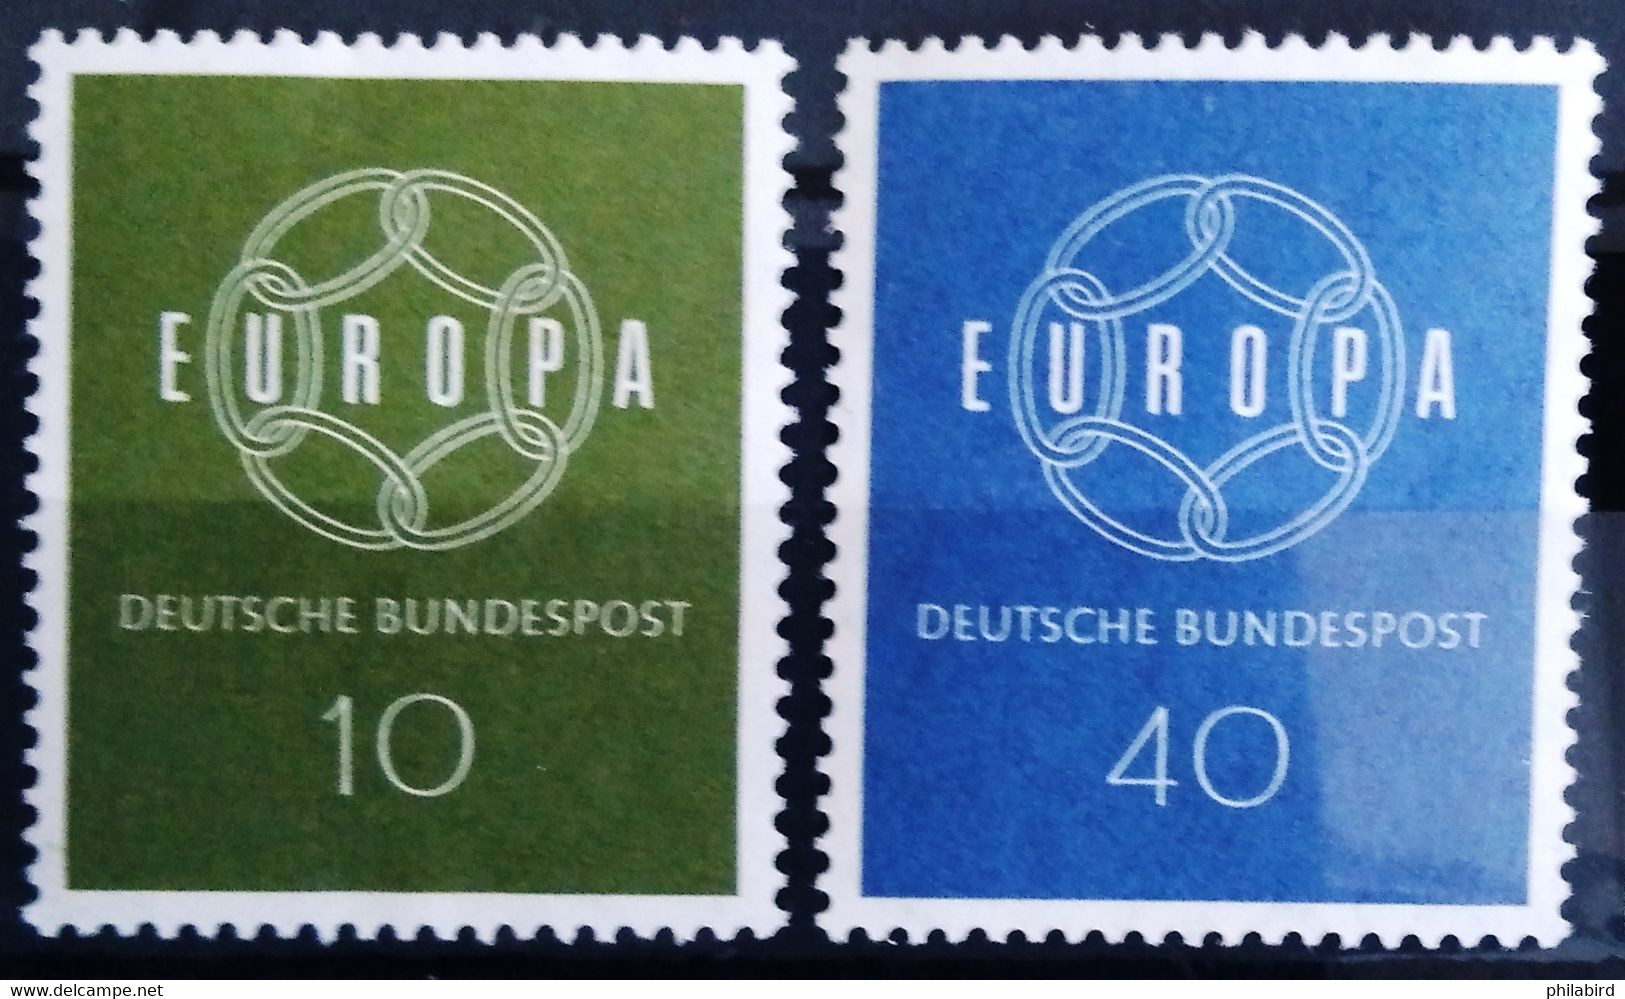 EUROPA 1959 - ALLEMAGNE                    N° 193/194                        NEUF* - 1959